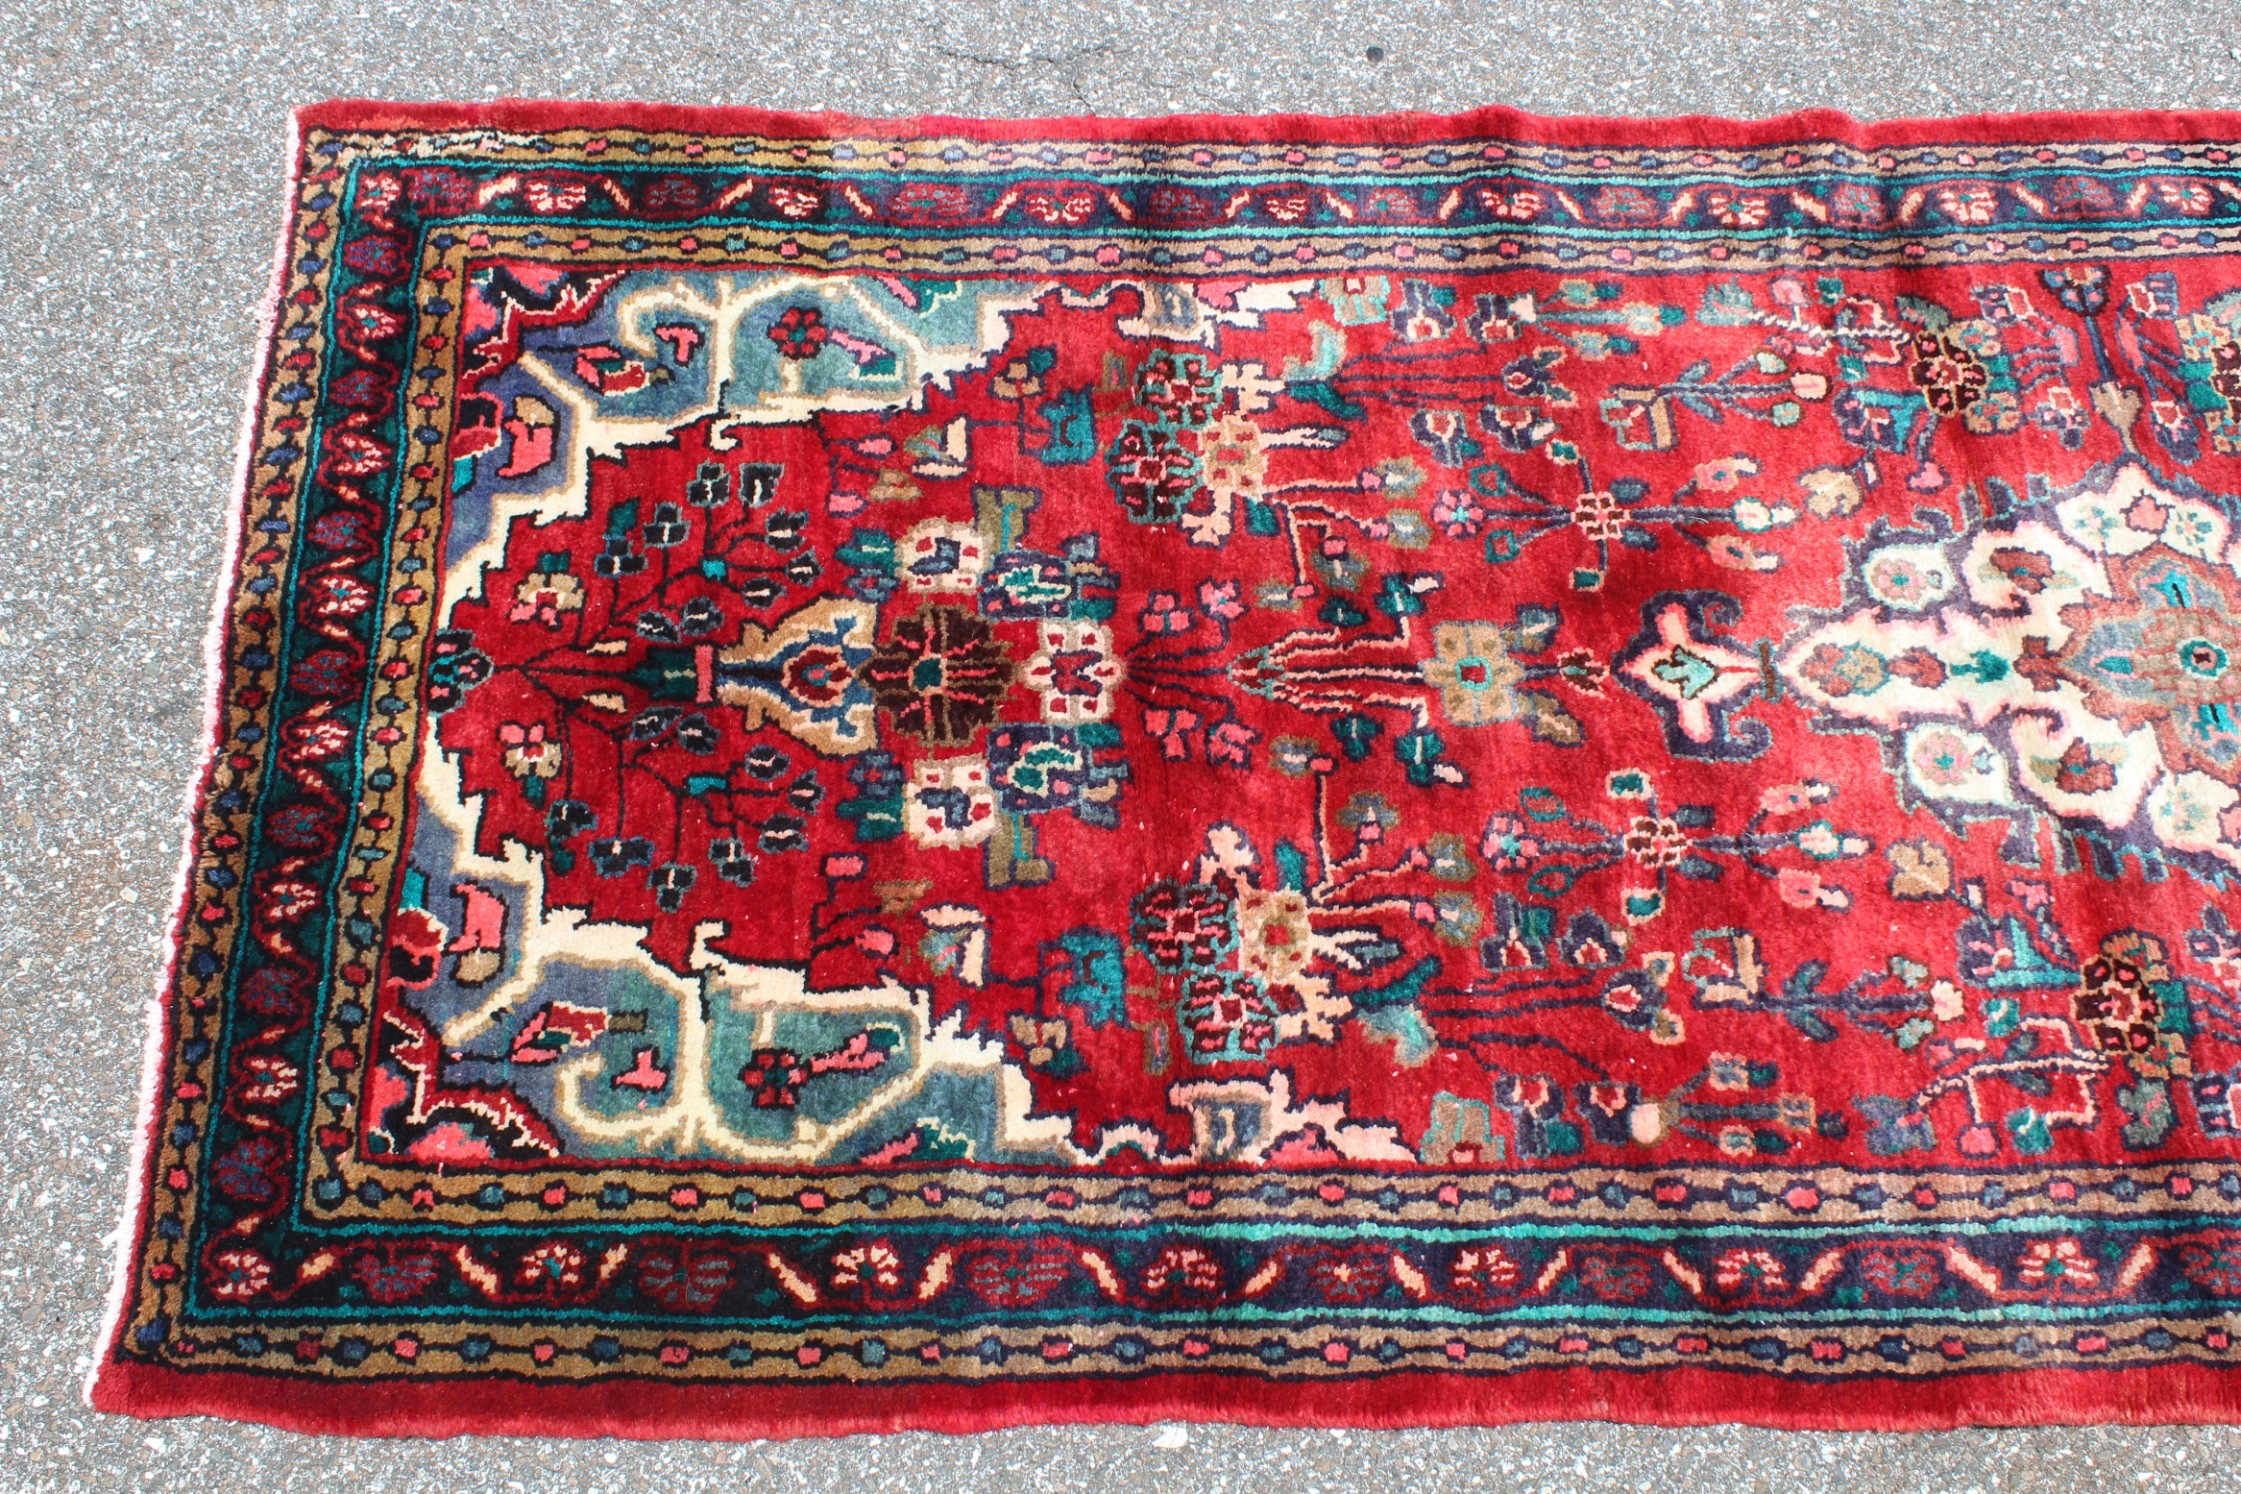 Sharuq Hand-Knotted Persian Wool Rug - 3'7" x 10' - Image 8 of 10